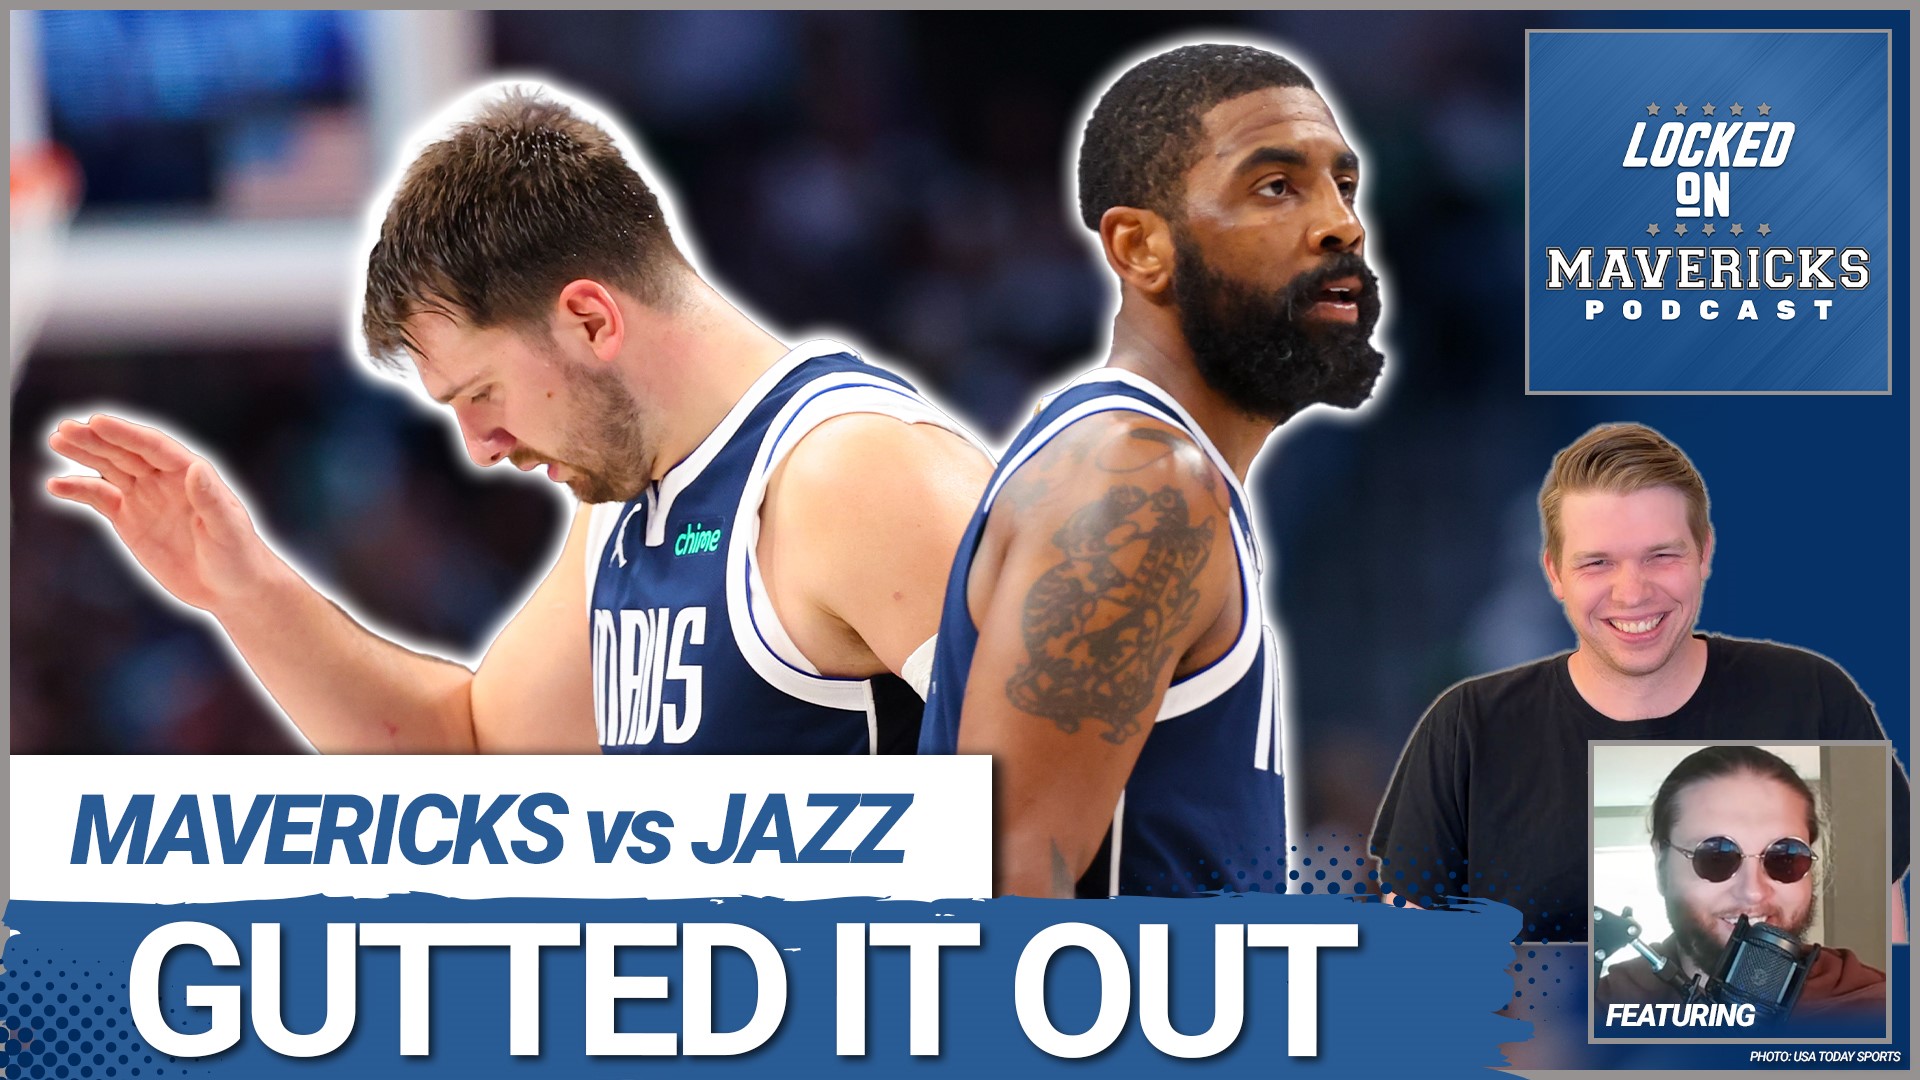 Nick Angstadt & Slightly Biased breakdown the Dallas Mavericks win over the Utah Jazz, how Luka Doncic & Kyrie Irving are clicking, and the Mavs Defense won.